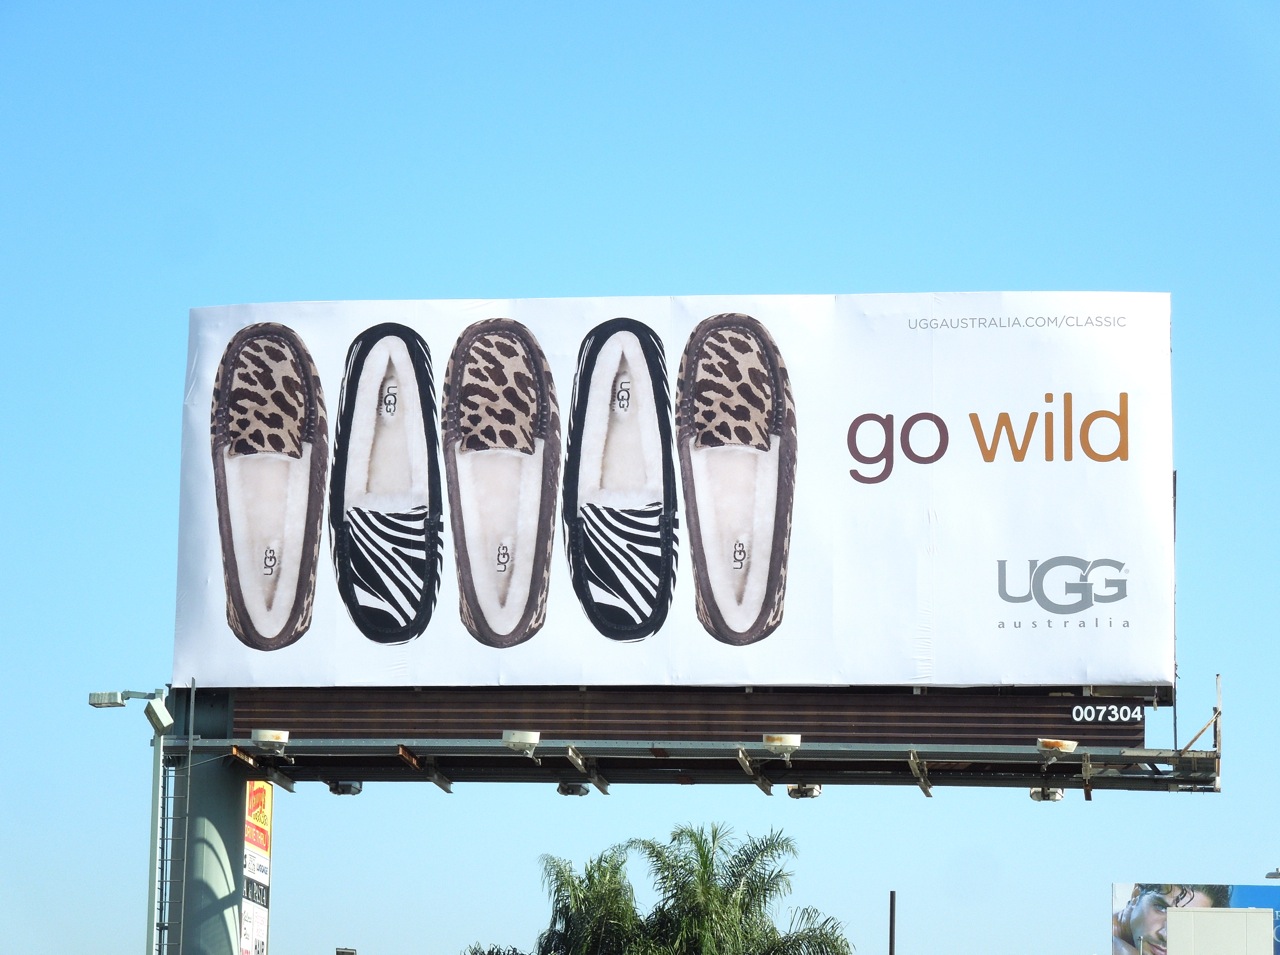 Daily Billboard: UGG Australia for Him and Her Winter 2012 billboards... Advertising ...1280 x 955